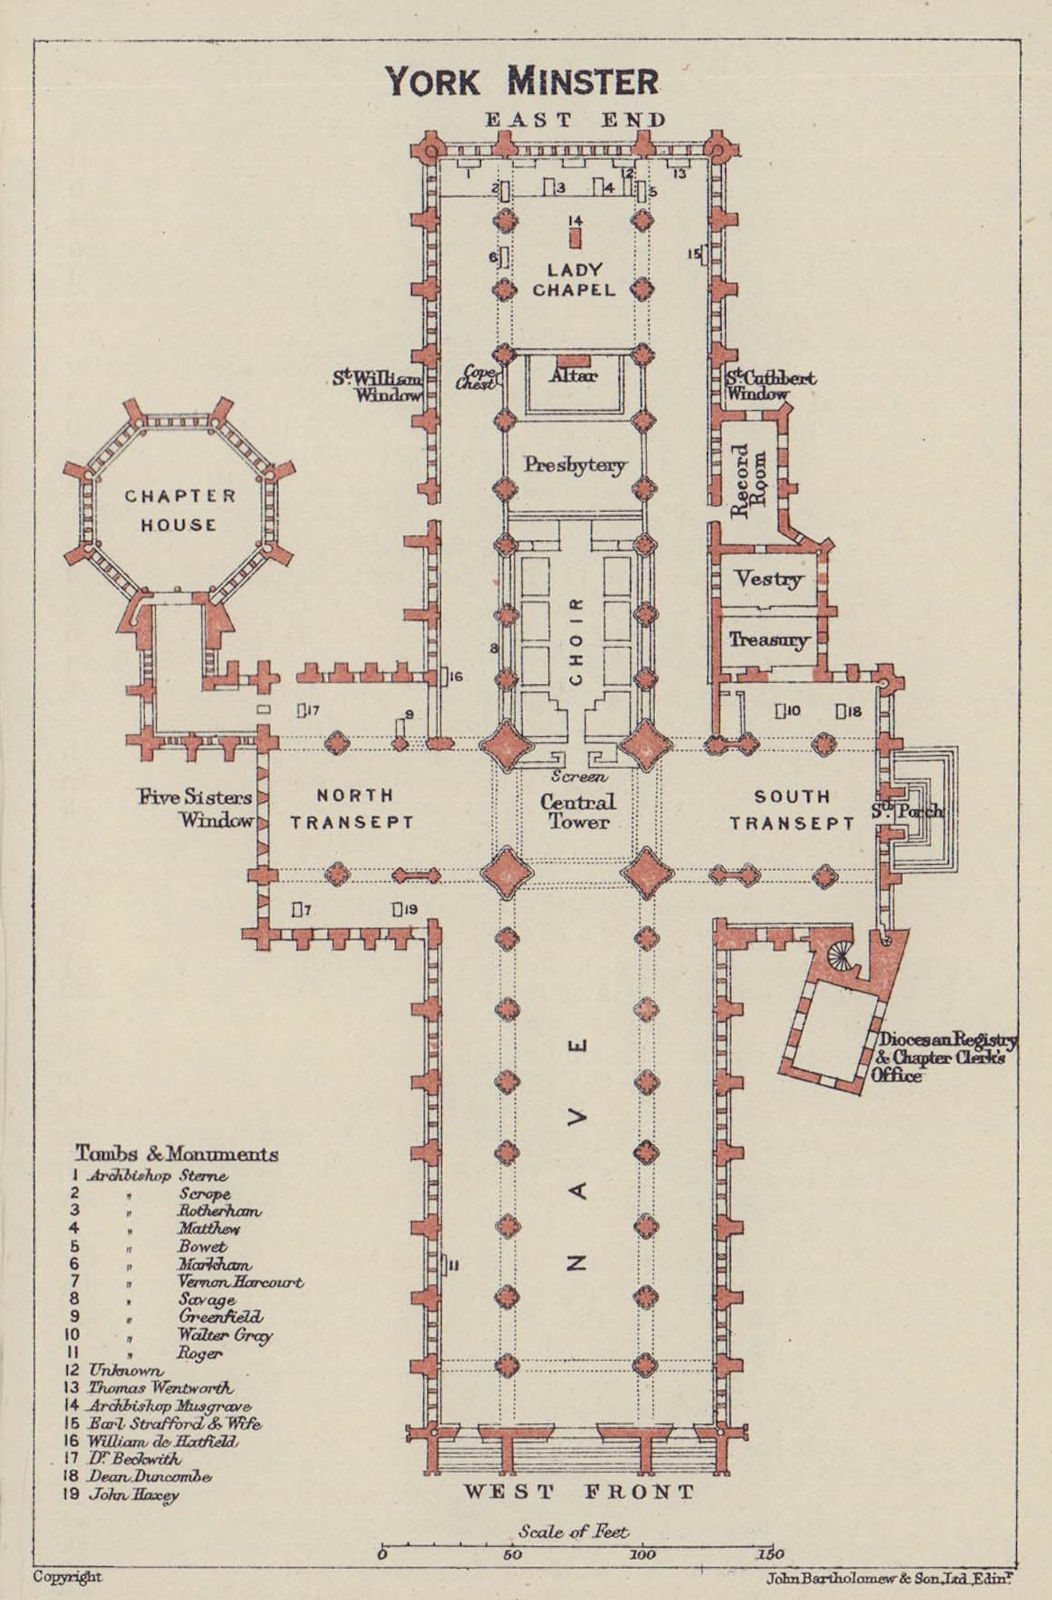 Associate Product York Minster ground floor plan. Yorkshire 1920 old antique map chart